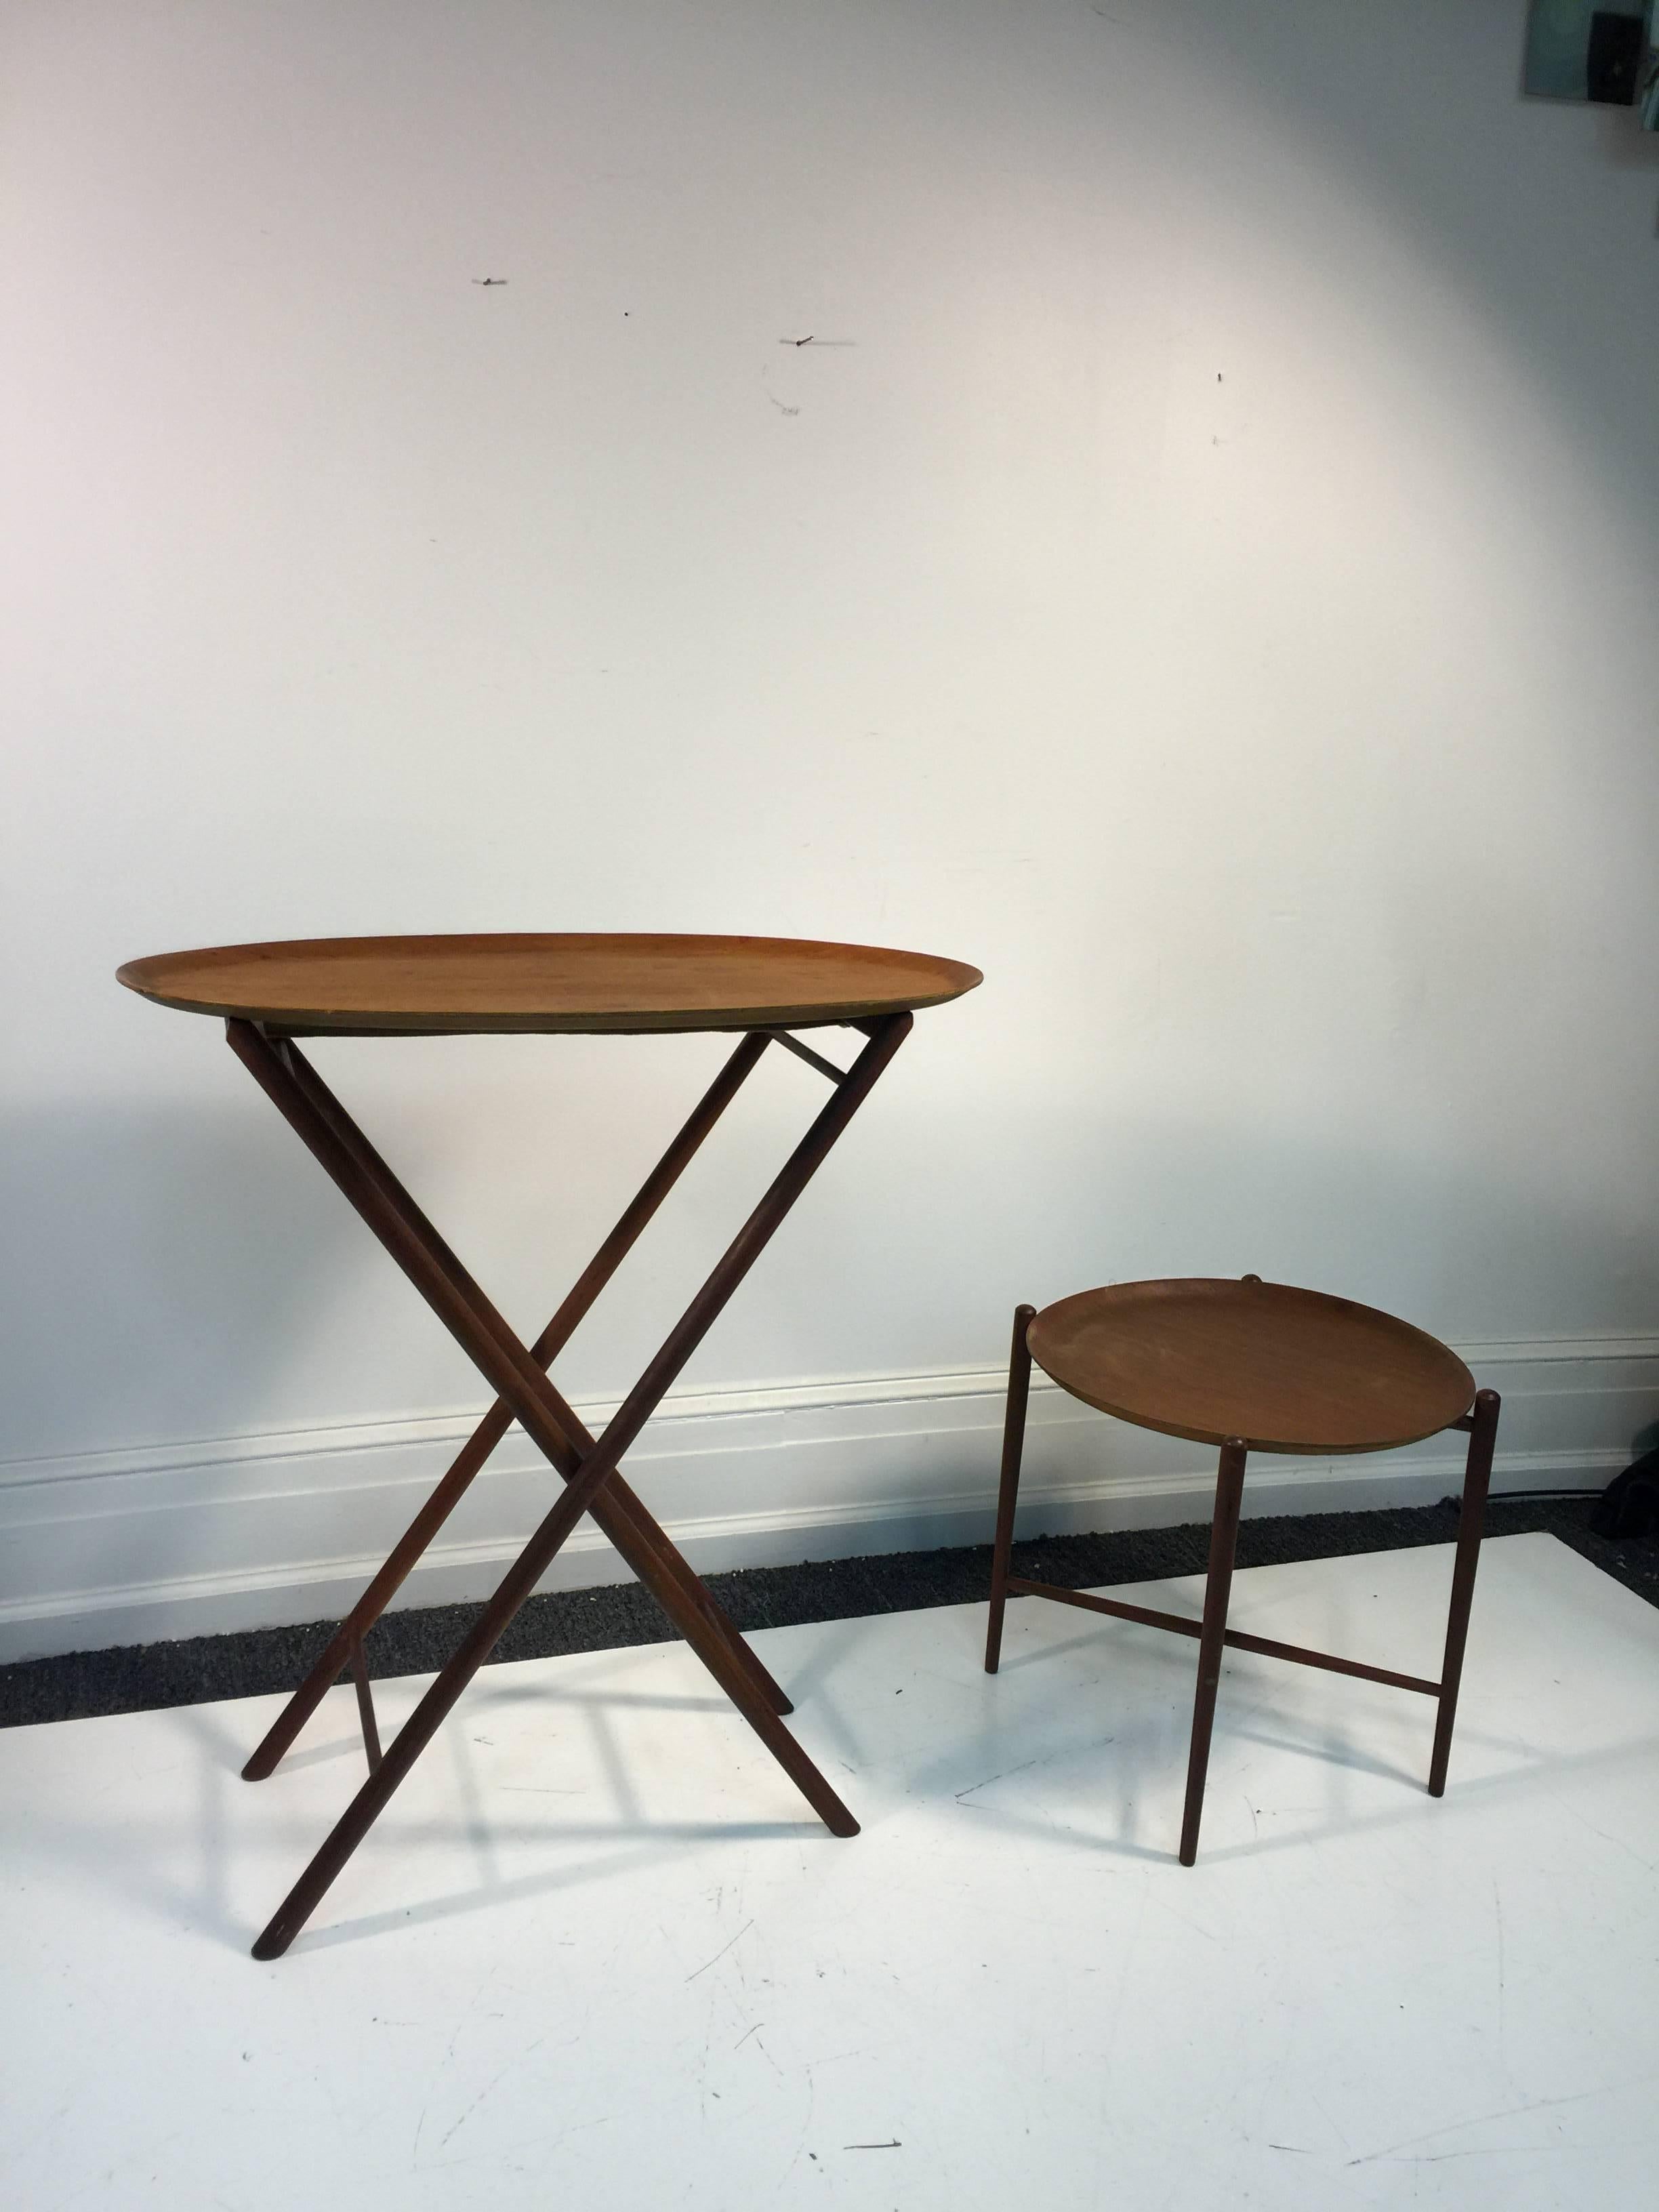 A terrific set of two 1970s Scandinavian Modern tray tables. The larger one has an oval top and is folding. The smaller one has a round top, X-base design, and tapered legs.
Measures:
Large: 33' W x 16